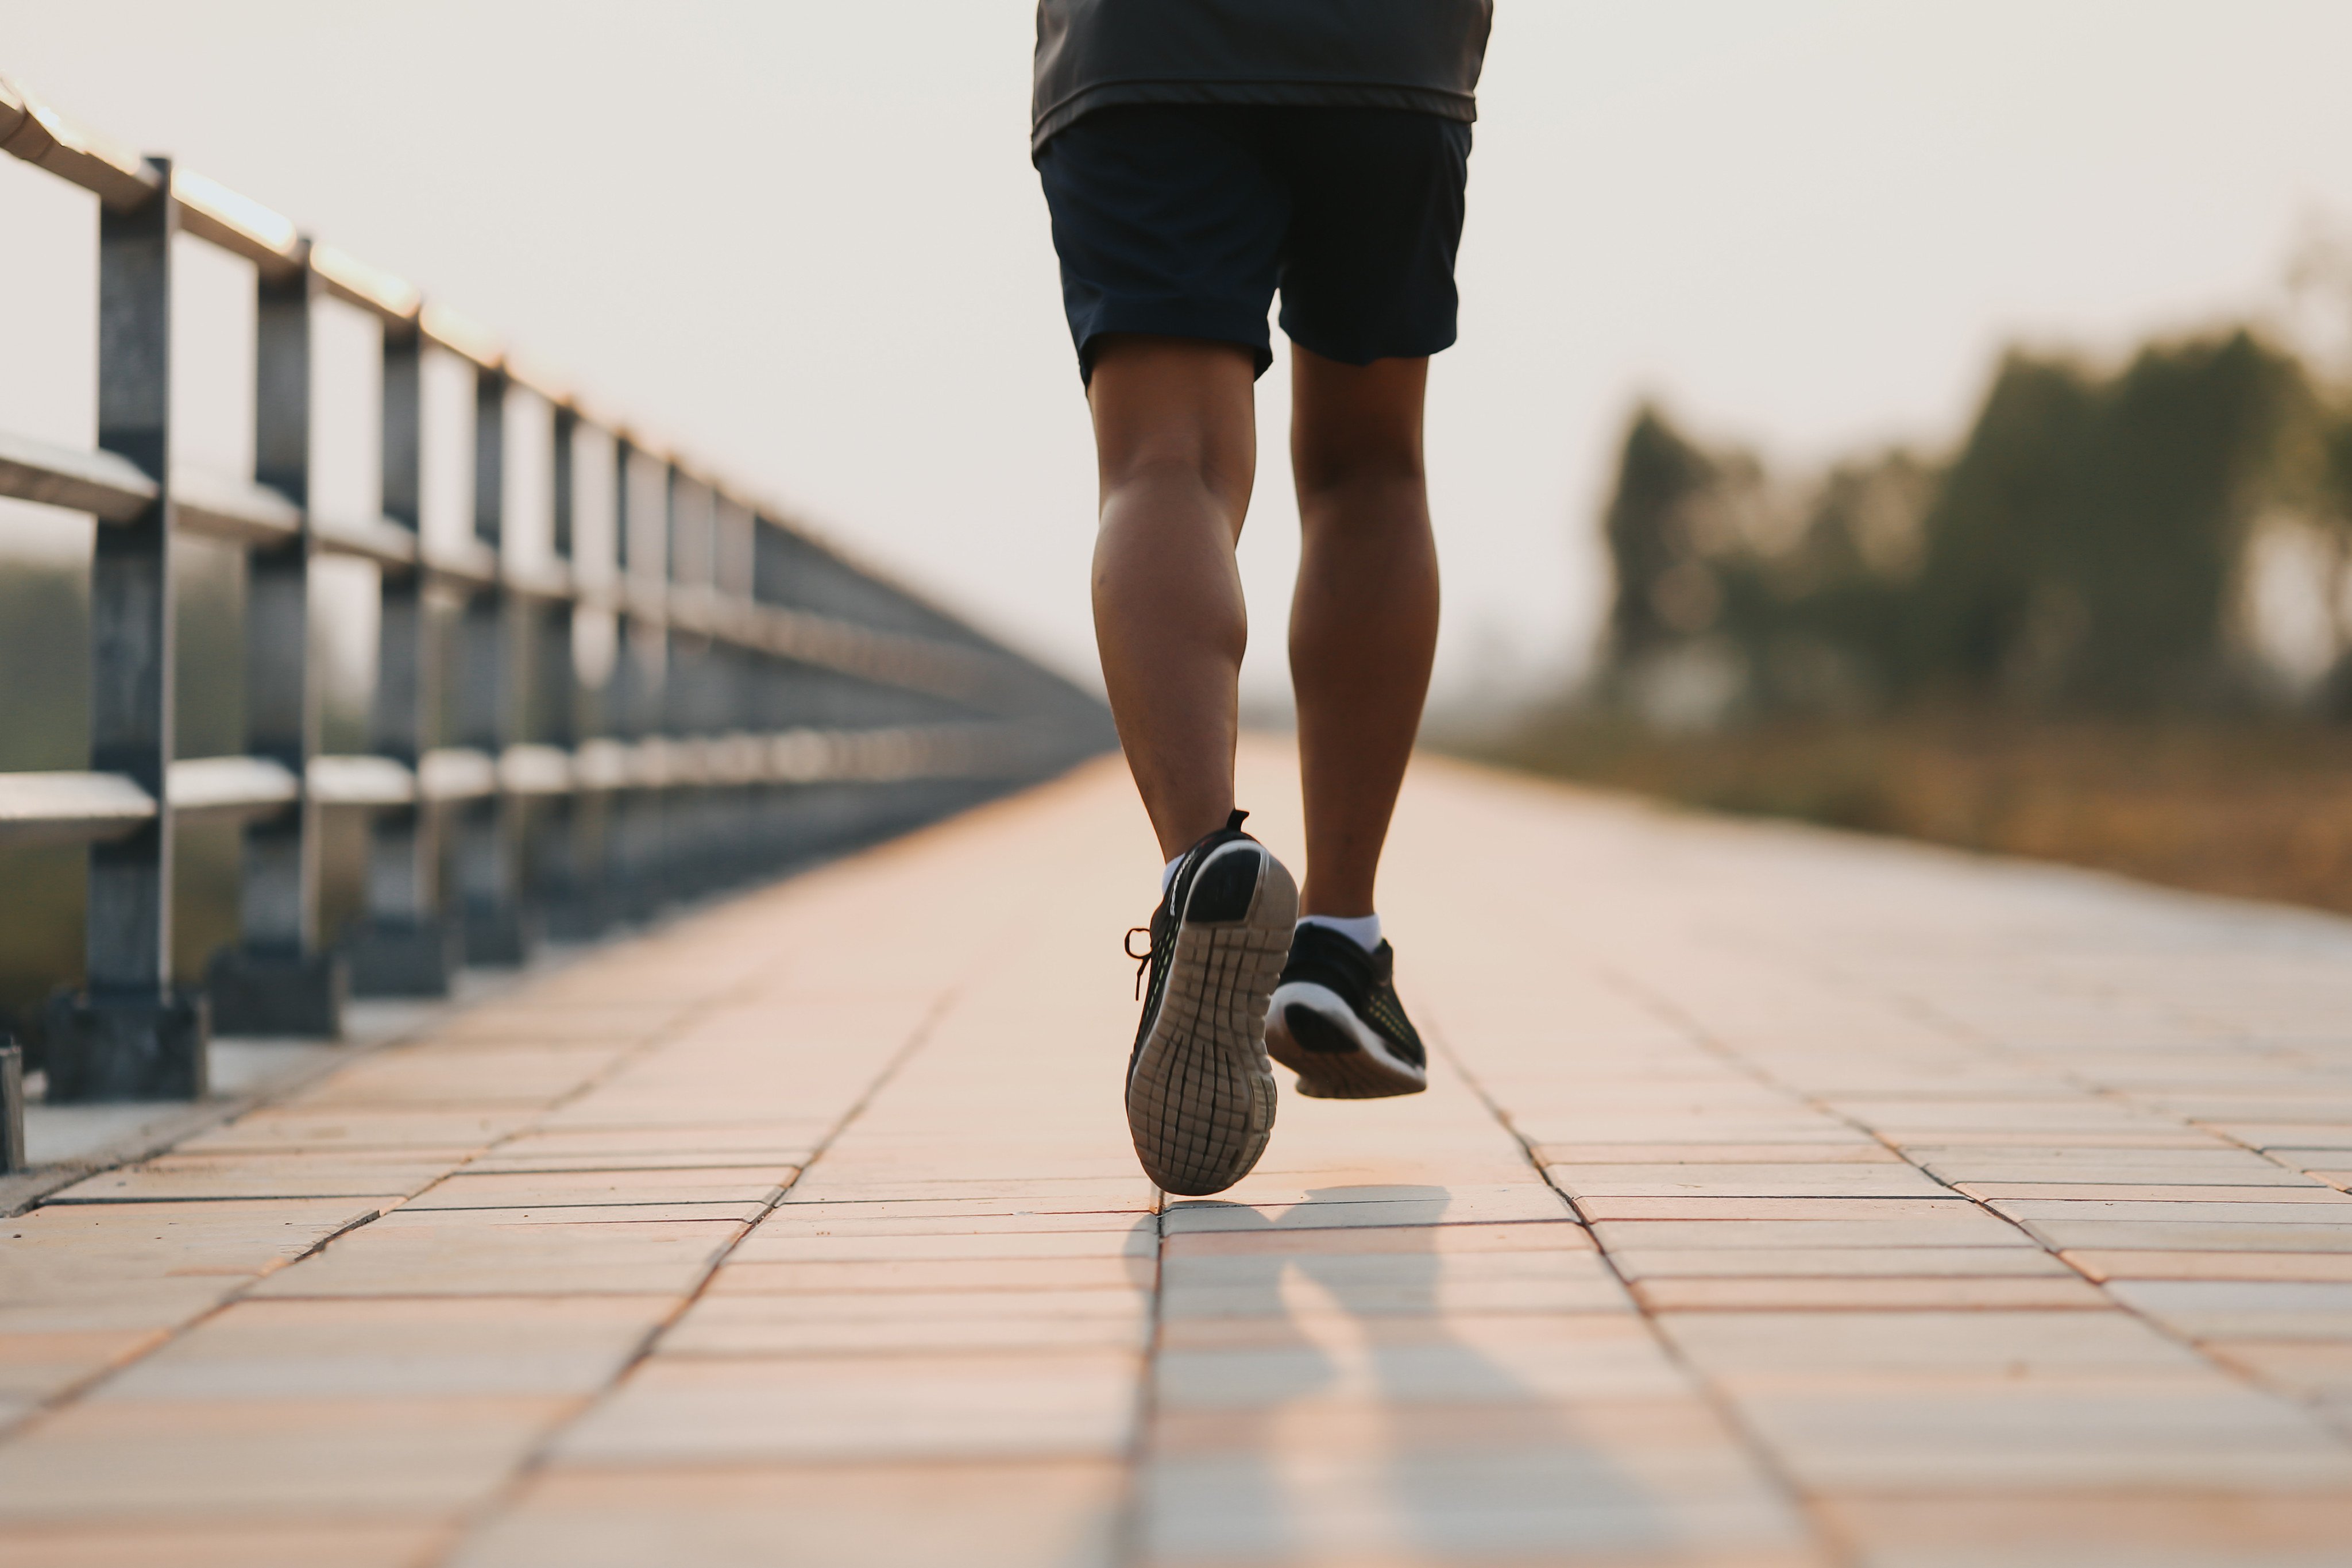 Moving your body regularly is one of life coach Simon Ong’s tips on how to boost energy and productivity and be less tired. Photo: Shutterstock